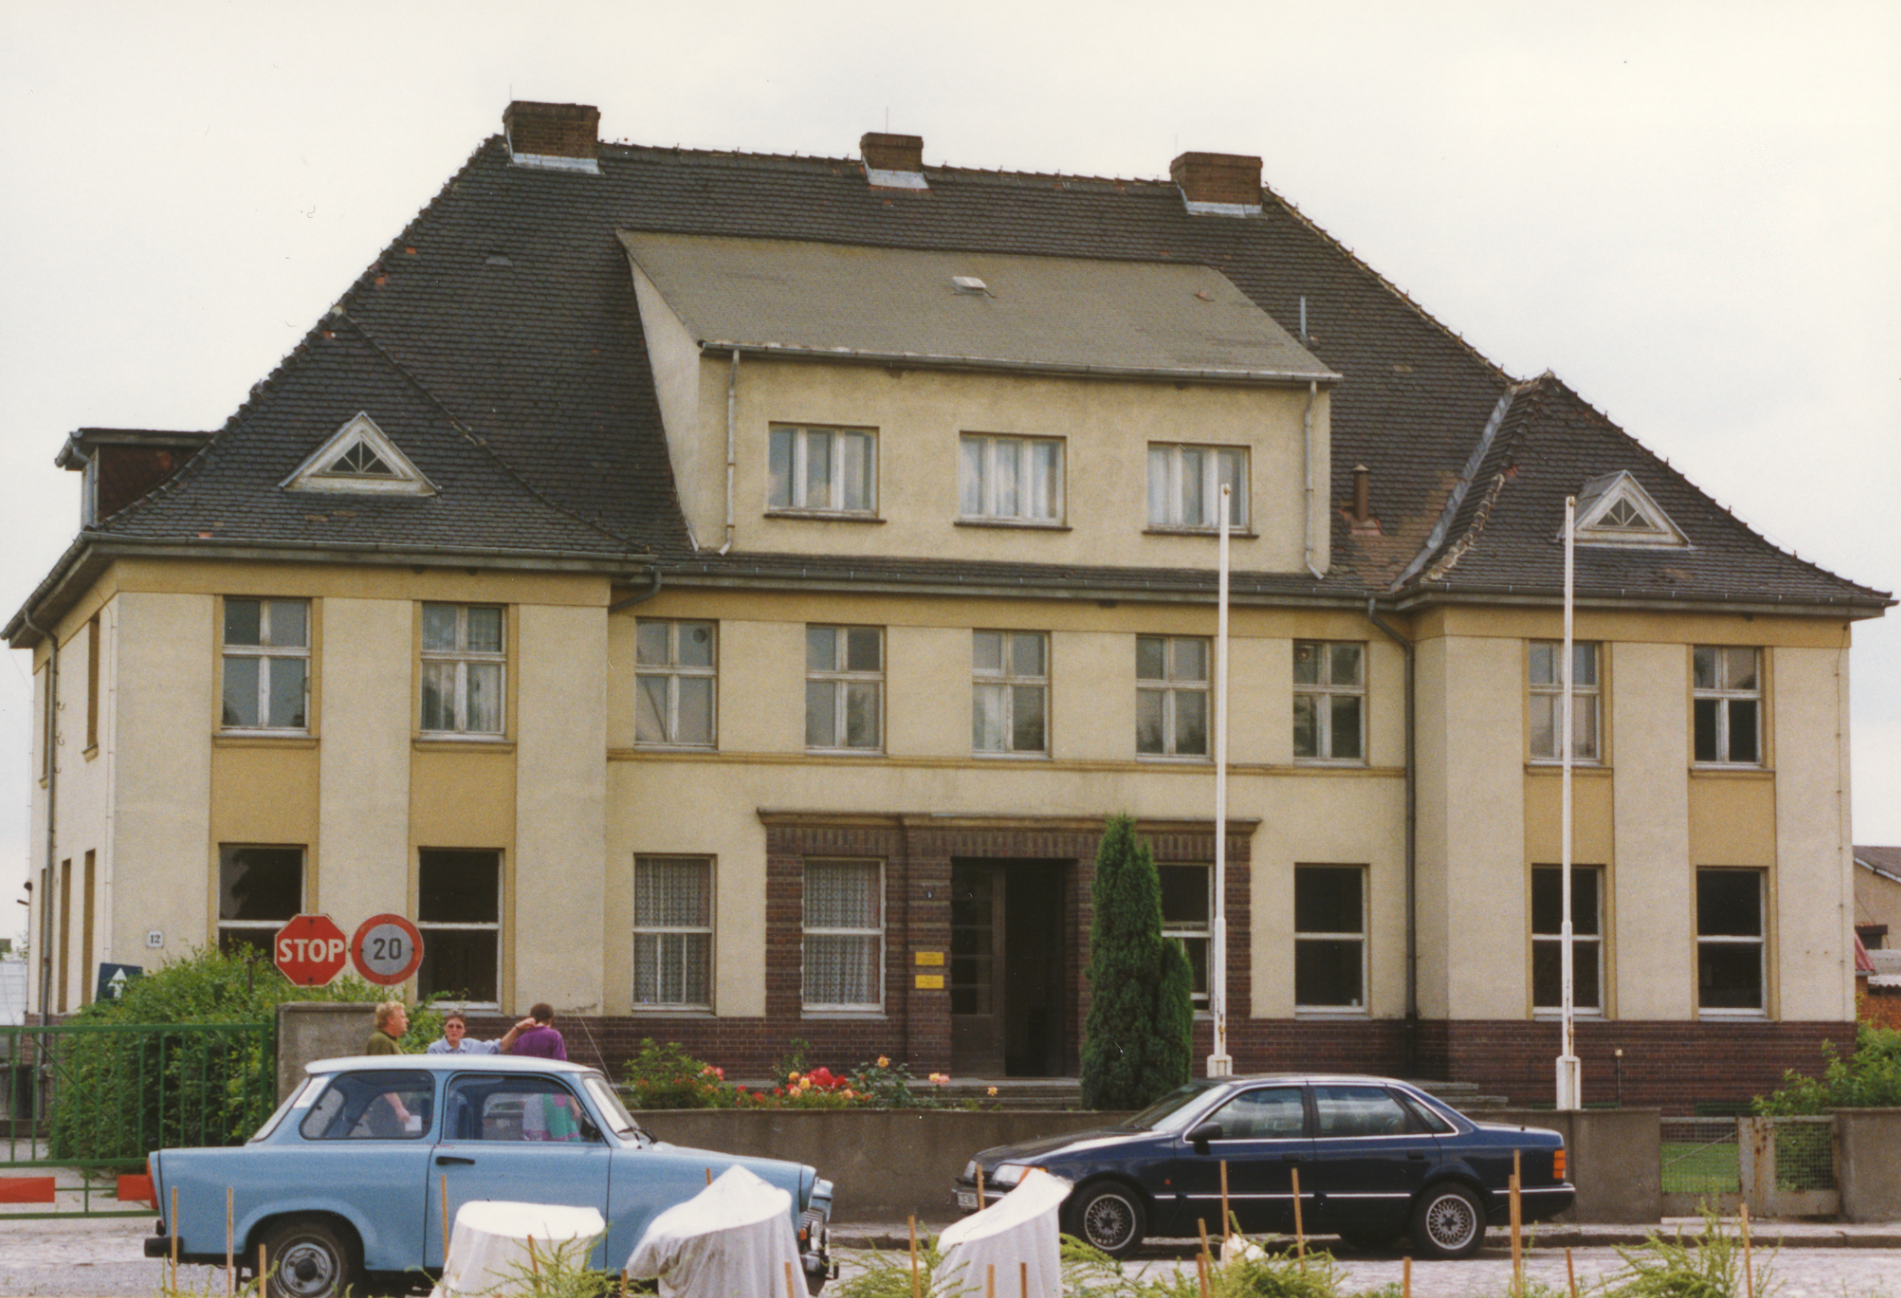 Institute for plant breeding in Klein Wanzleben, established in 1930; today the administration building of the breeding station